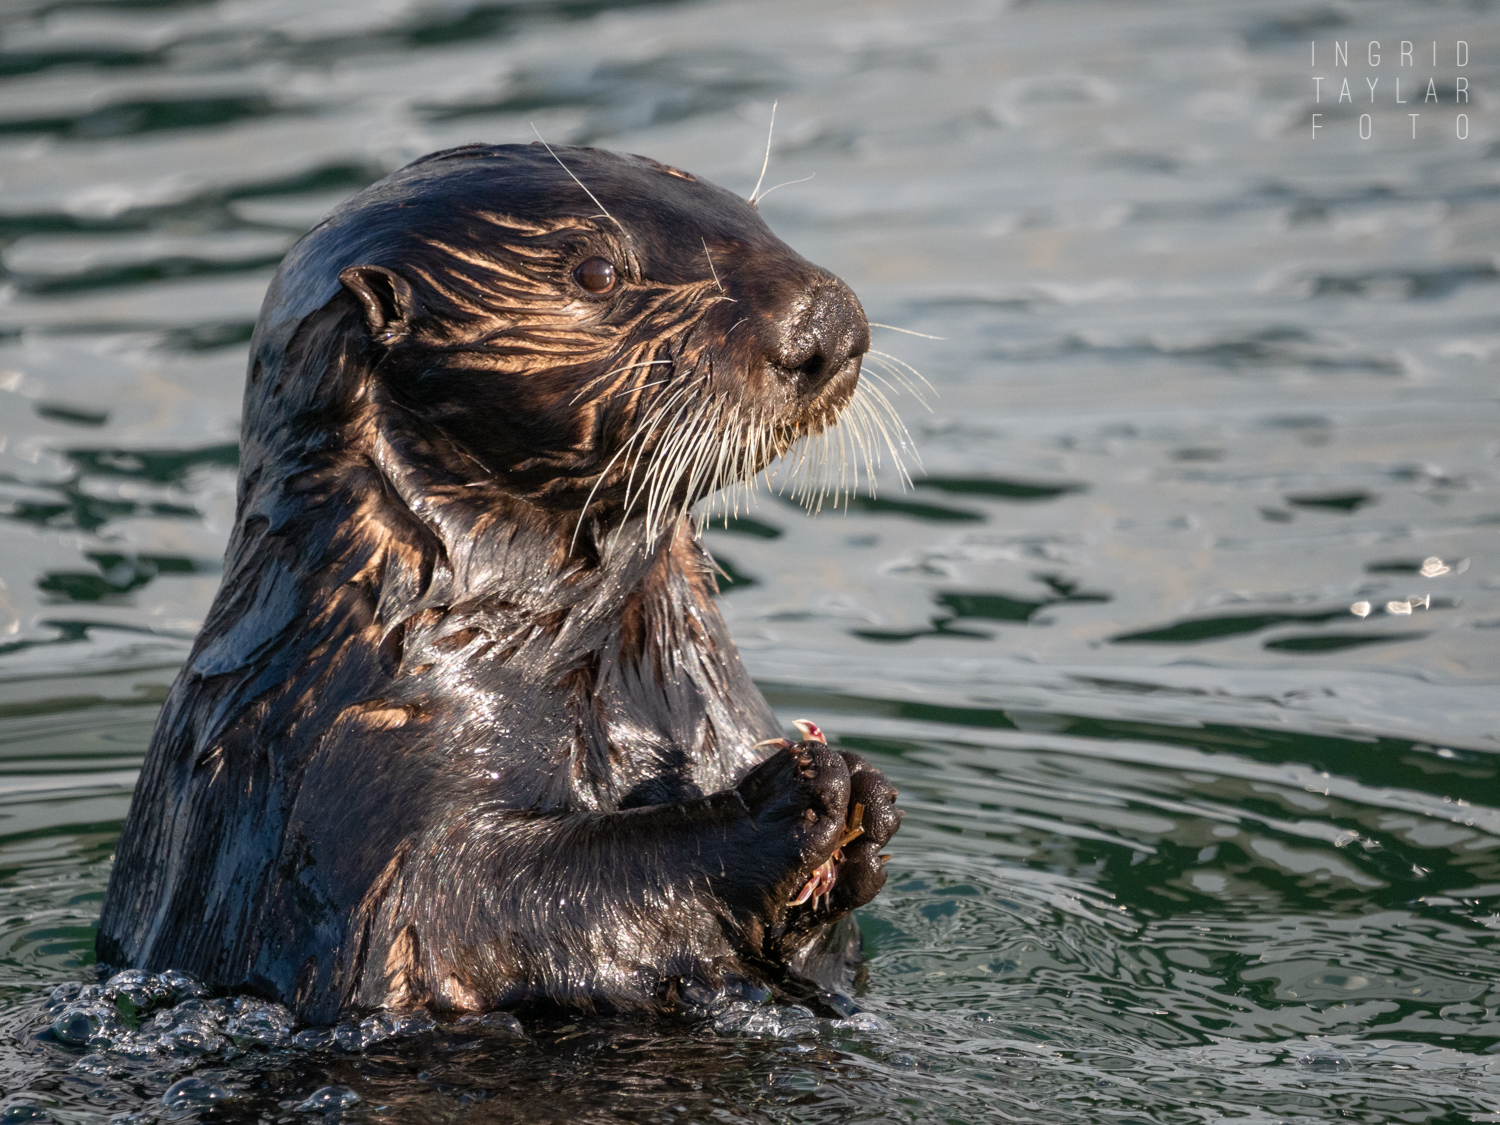 Sea Otter Eating Crab in Monterey Bay